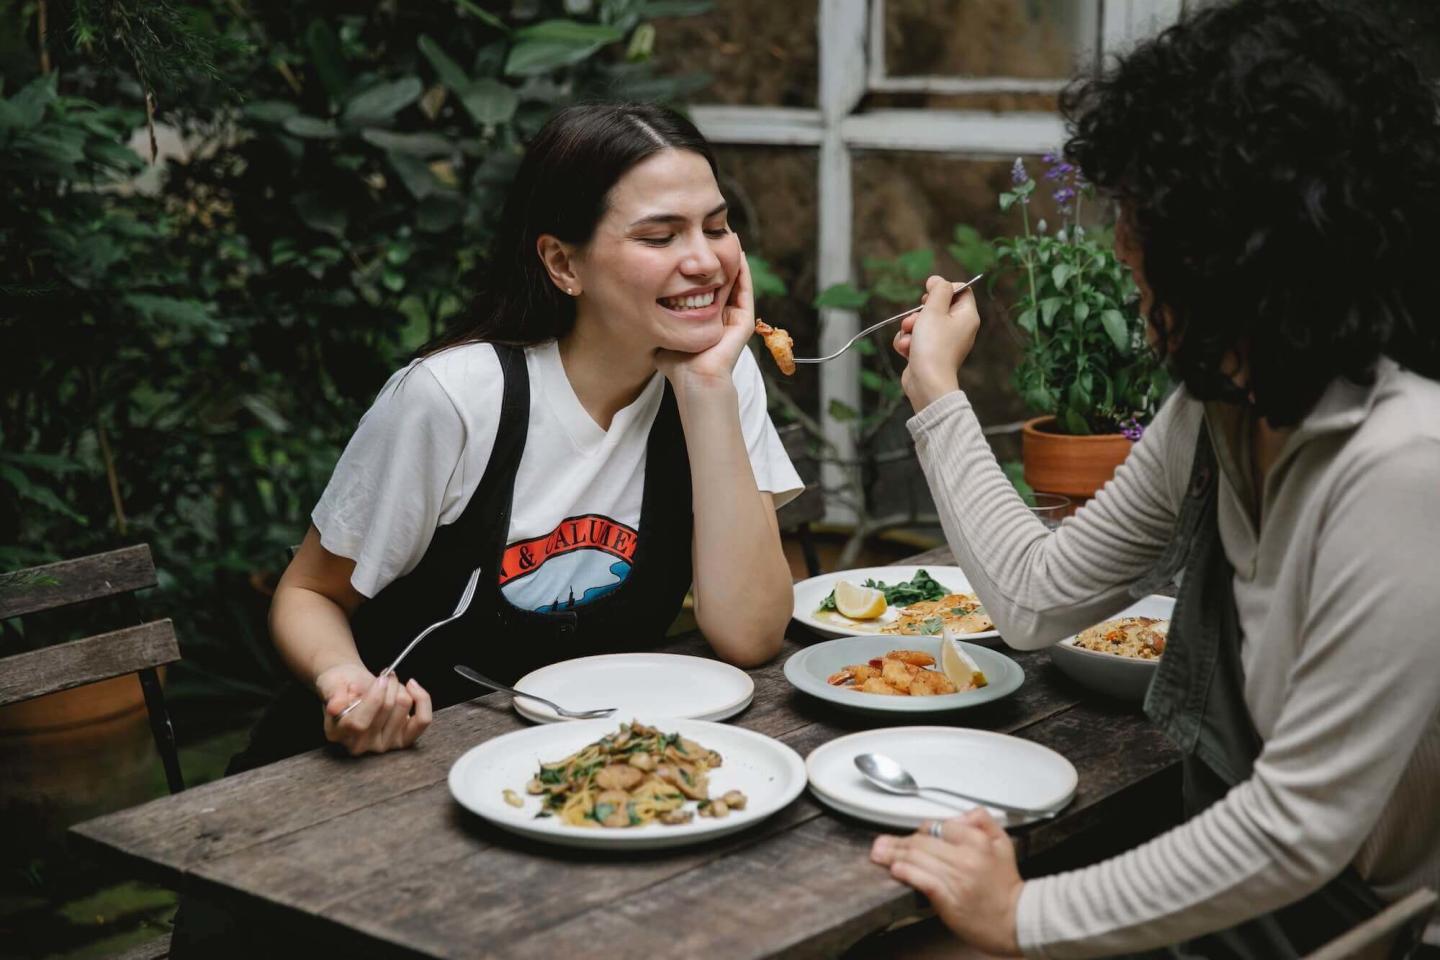 Two women eating, one feeding the other